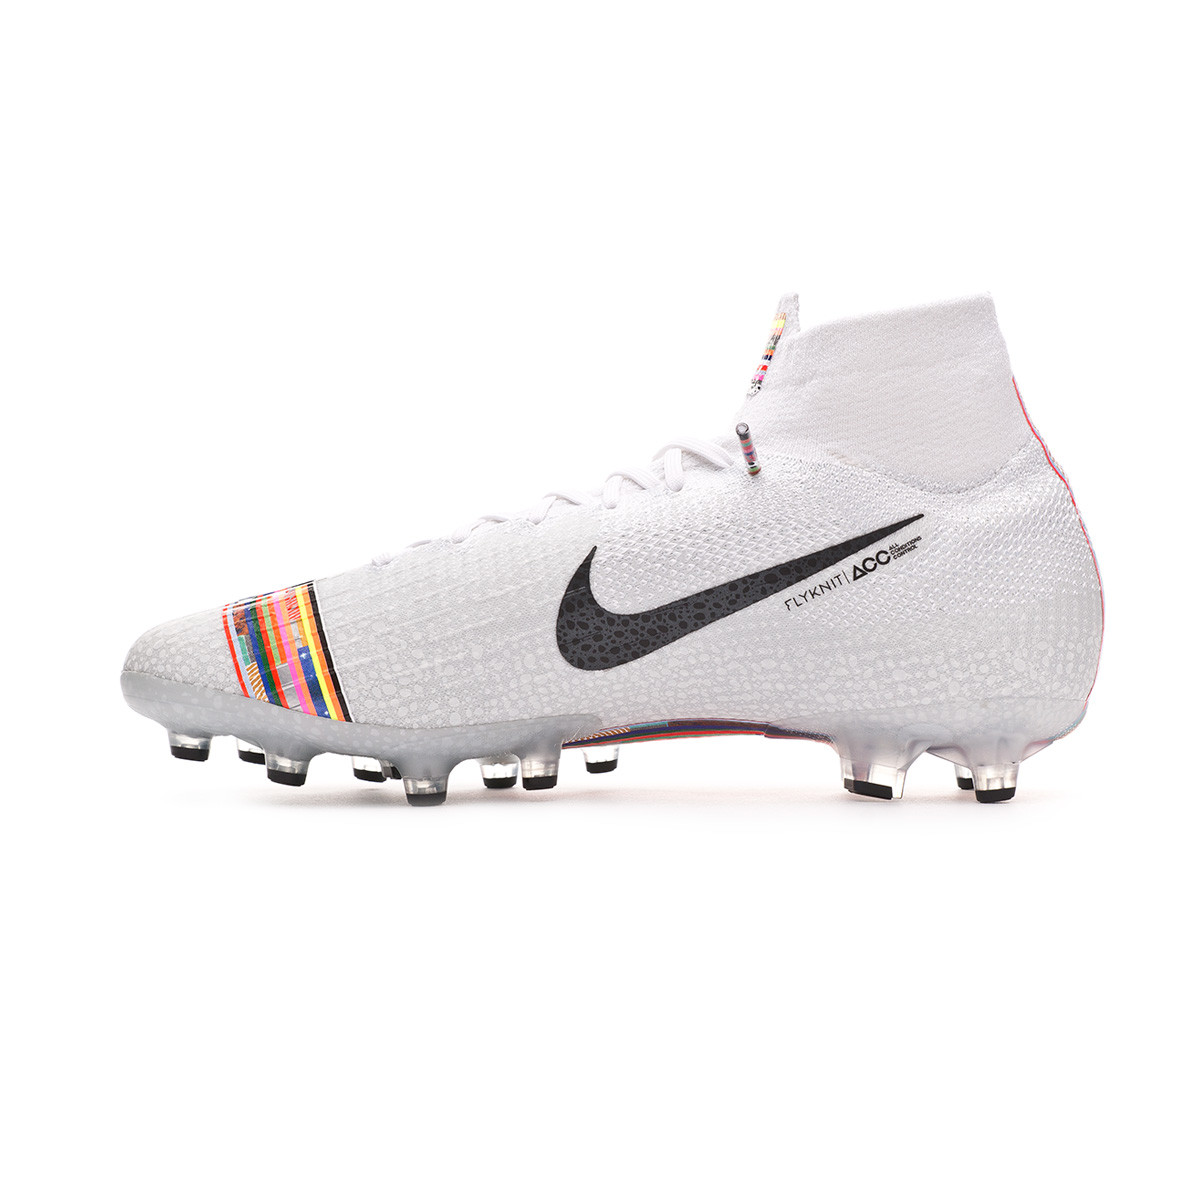 white and rainbow nike soccer cleats